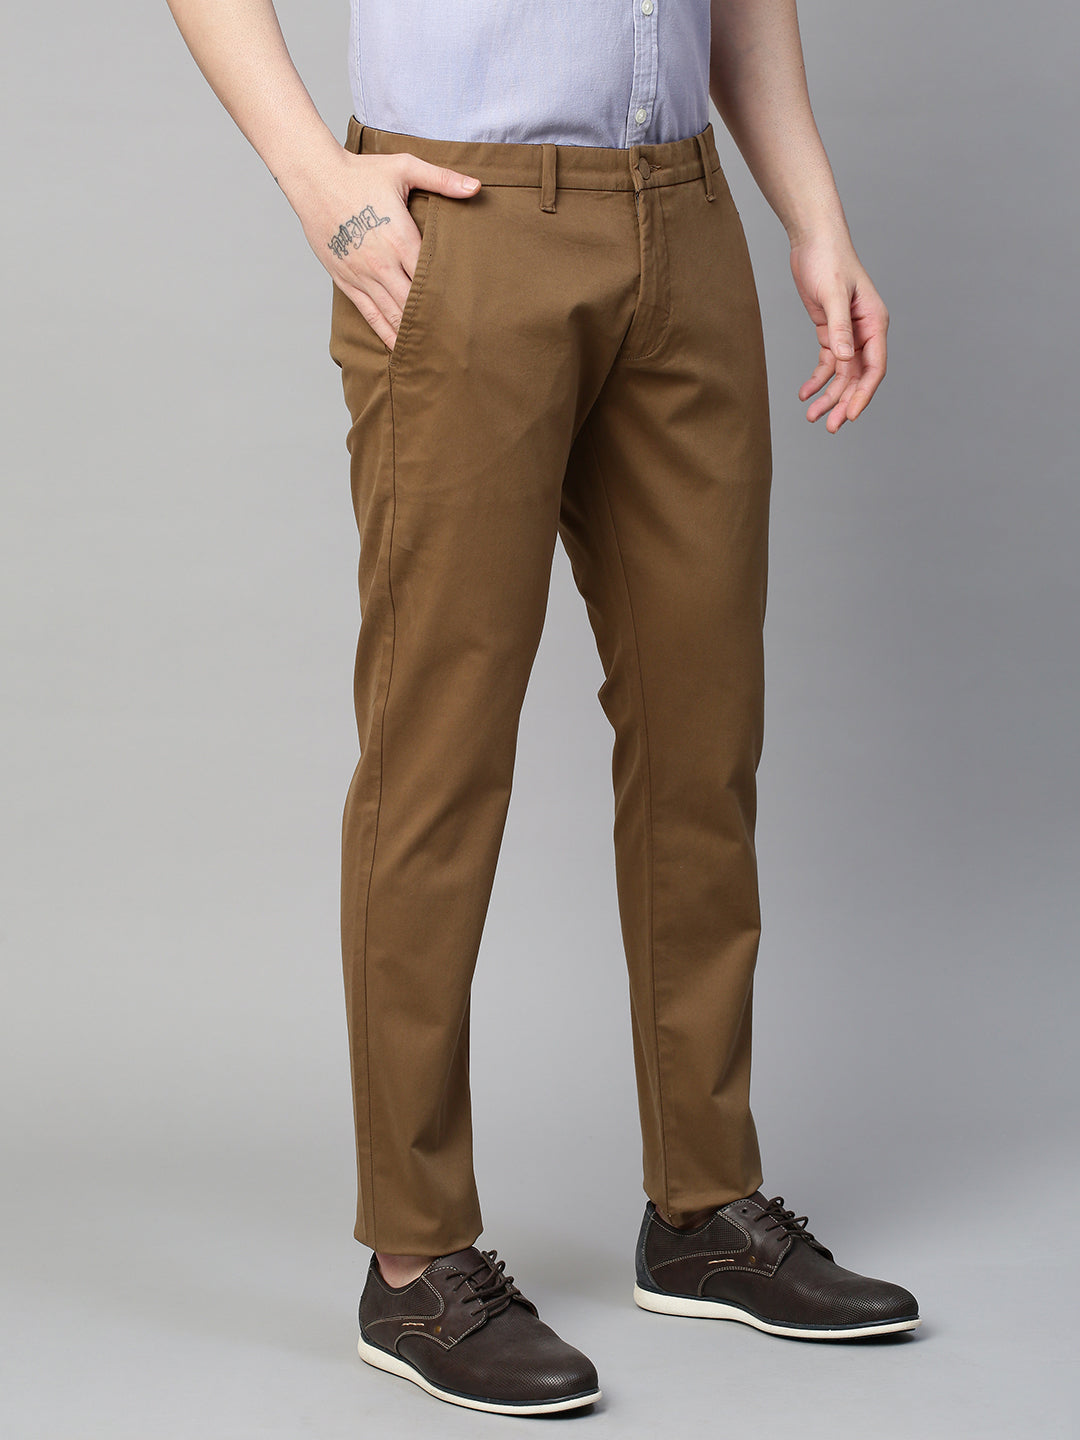 Genips Men's Brown Cotton Stretch Caribbean Slim Fit Solid Trousers